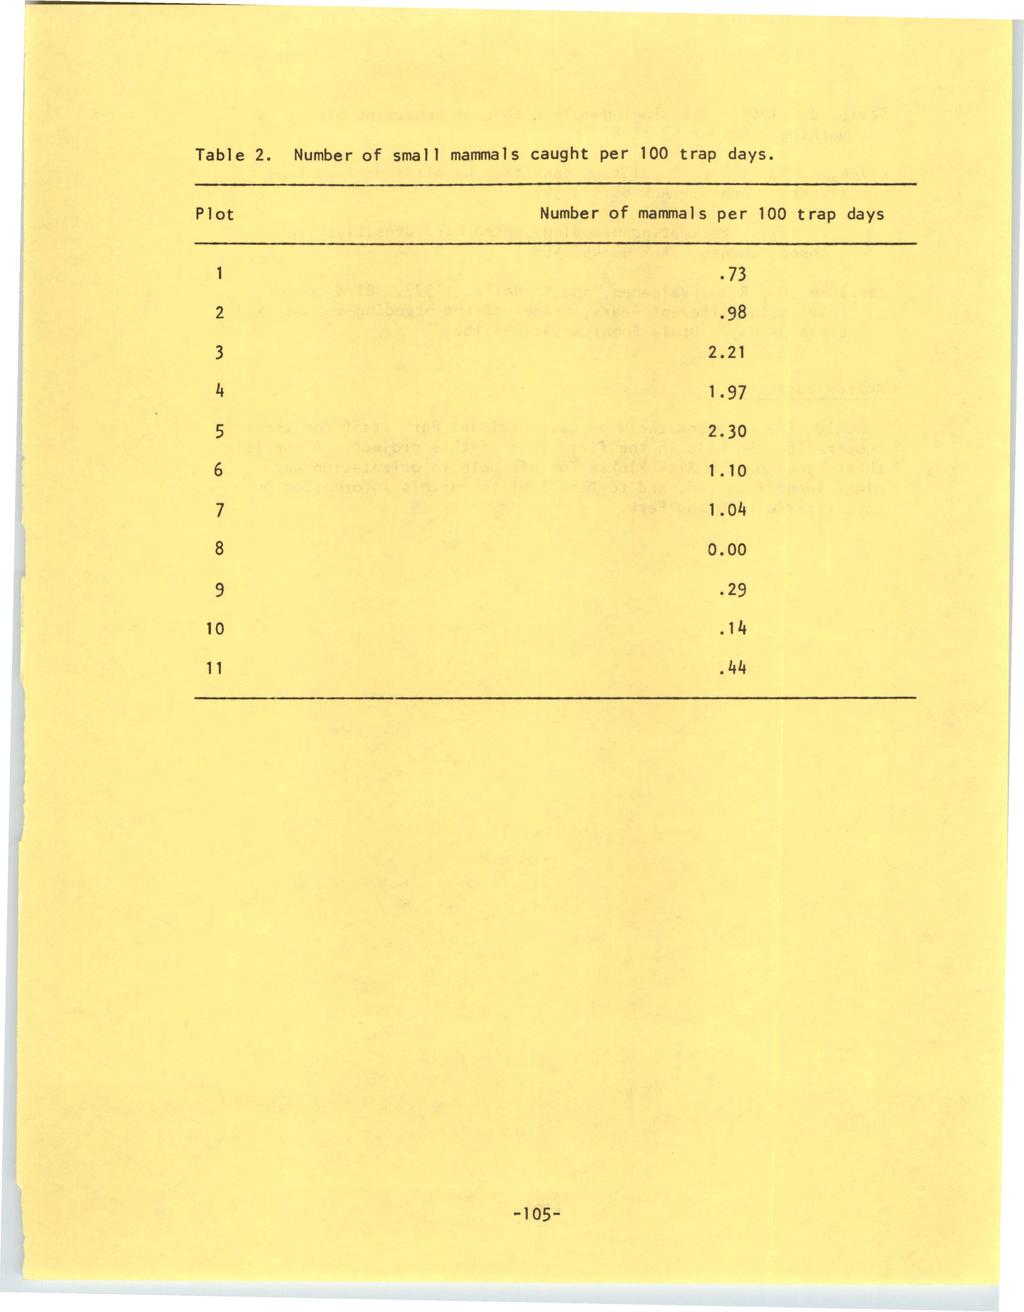 University of Wyoming National Park Service Research Center Annual Report, Vol. 4 [1980], Art. 21 Table 2. Number of smal 1 mammals caught per 100 trap days.